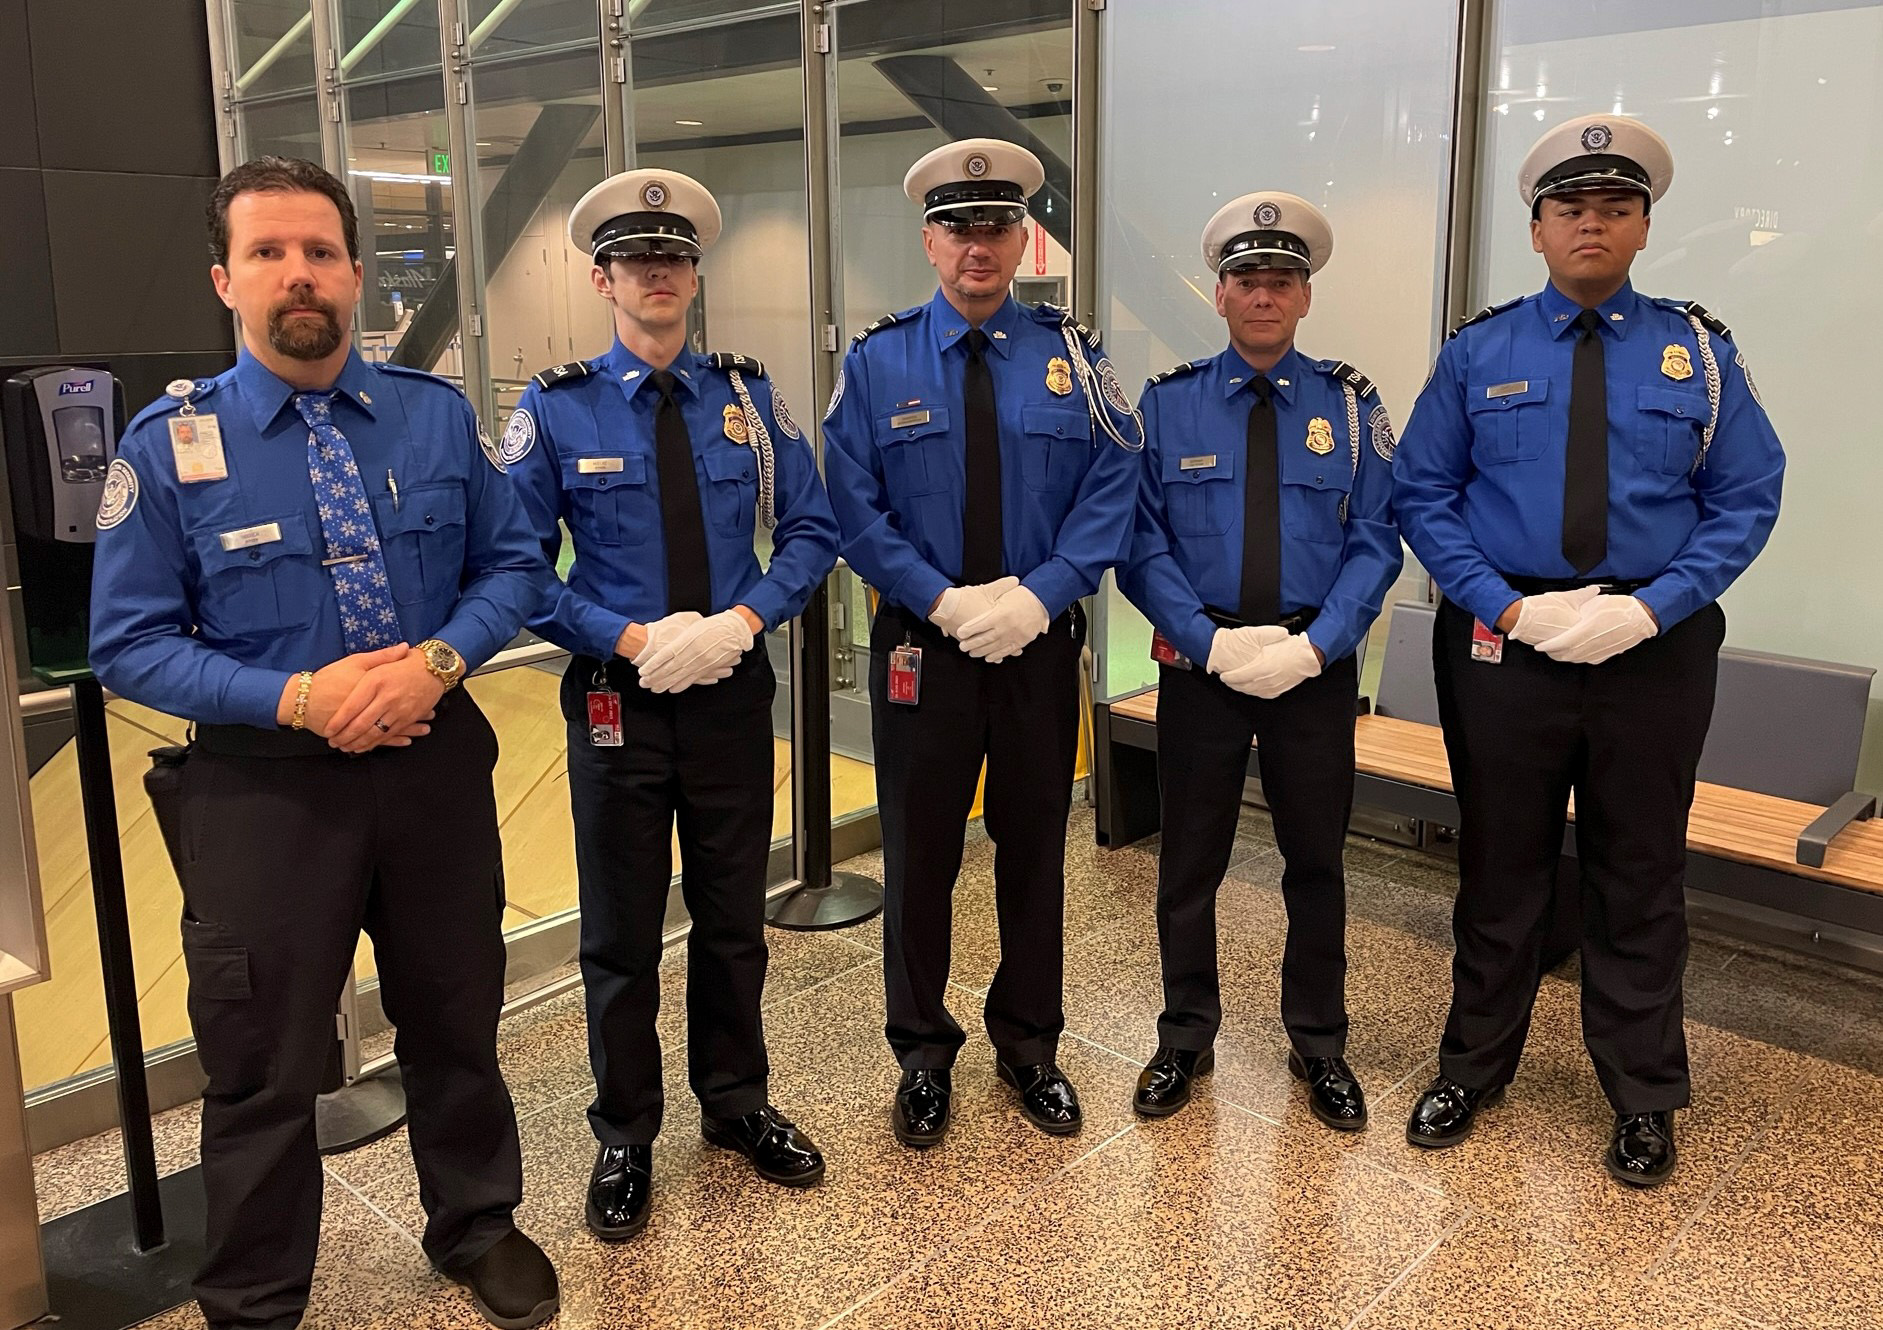 Members of TSA’s Honor Guard at Seattle-Tacoma International Airport. From left, TSA Officers Destry Hoover and Cody Mielke, Supervisory Officer Krzyzstof Zimonski, Lead Officer Joe Germany, Officer Wesley Carter. (Photo by BrookHunter Whelchel)